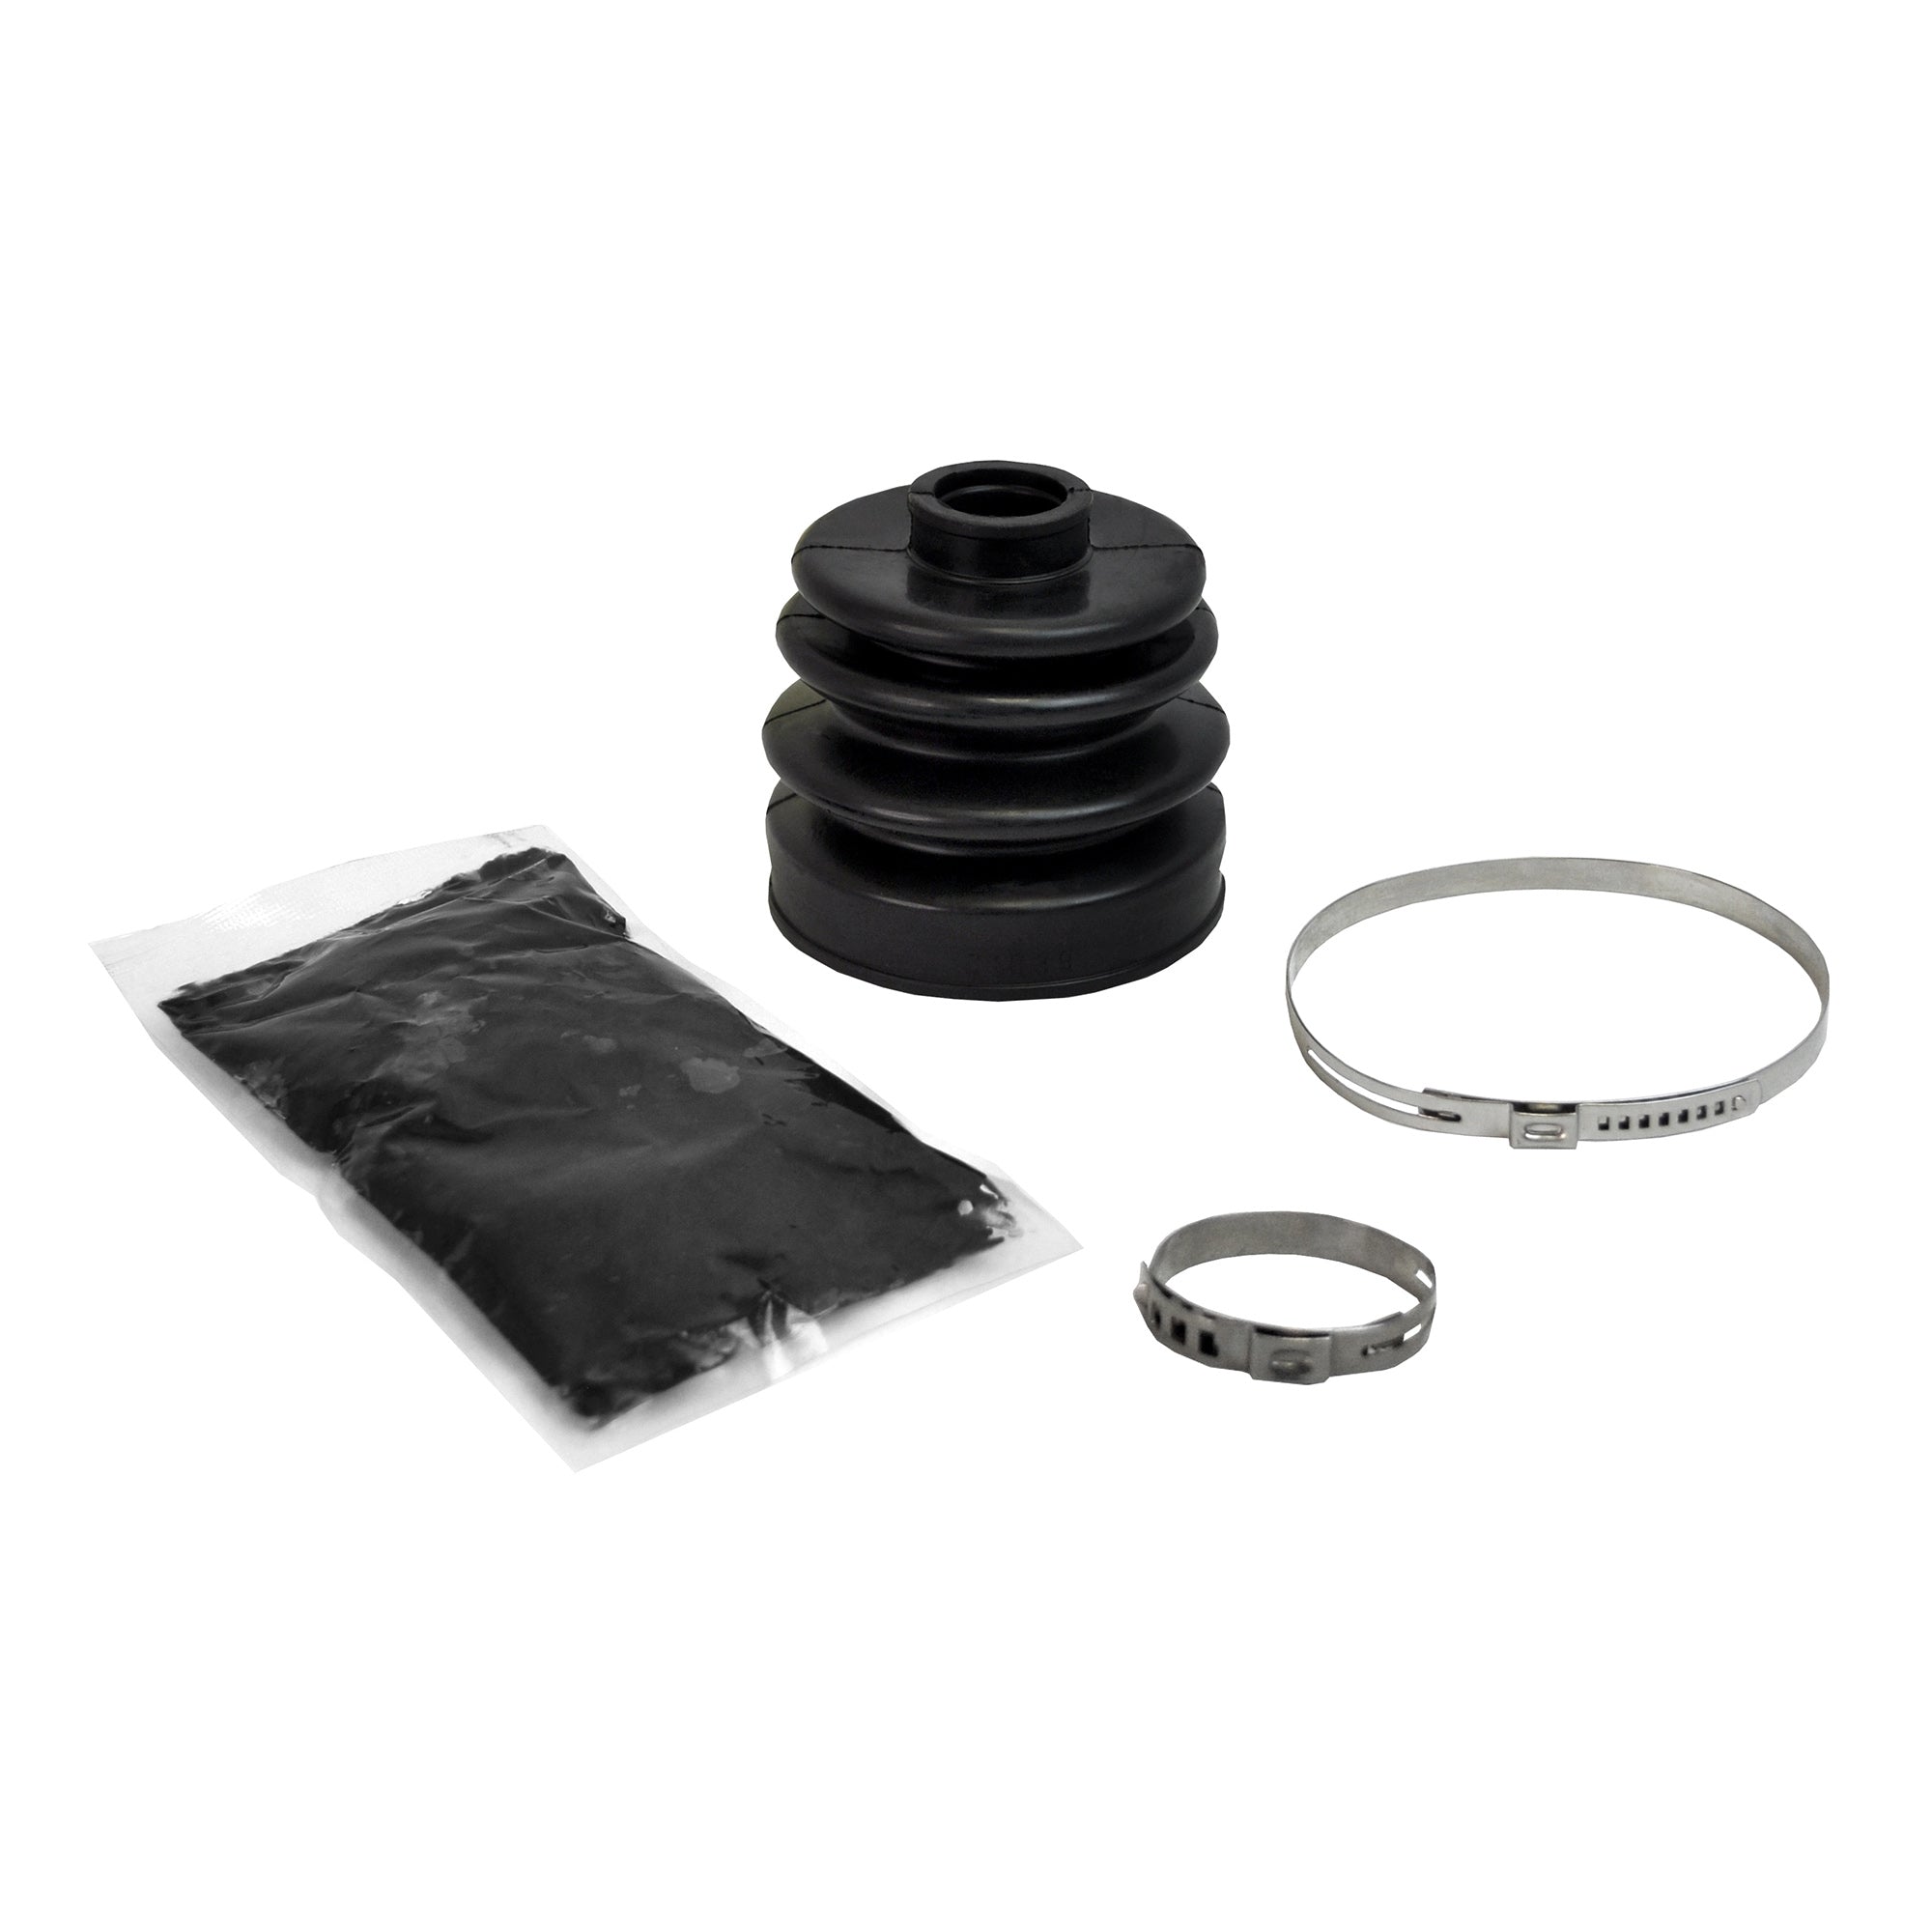 Polaris Trail Boss 250 Rugged OE Replacement Boot Kit